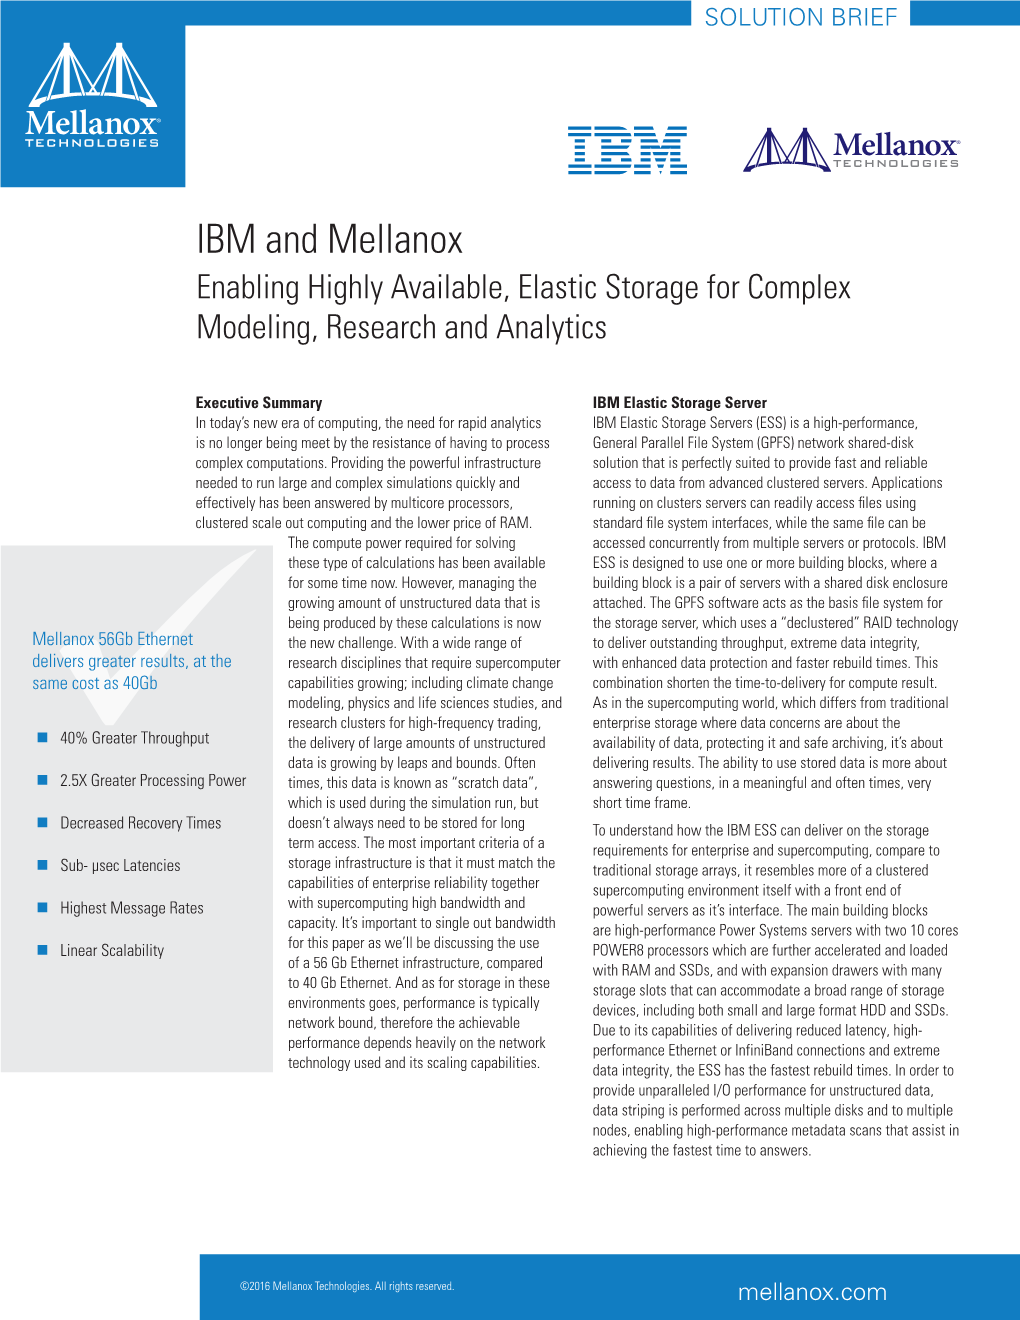 IBM and Mellanox Enabling Highly Available, Elastic Storage for Complex Modeling, Research and Analytics